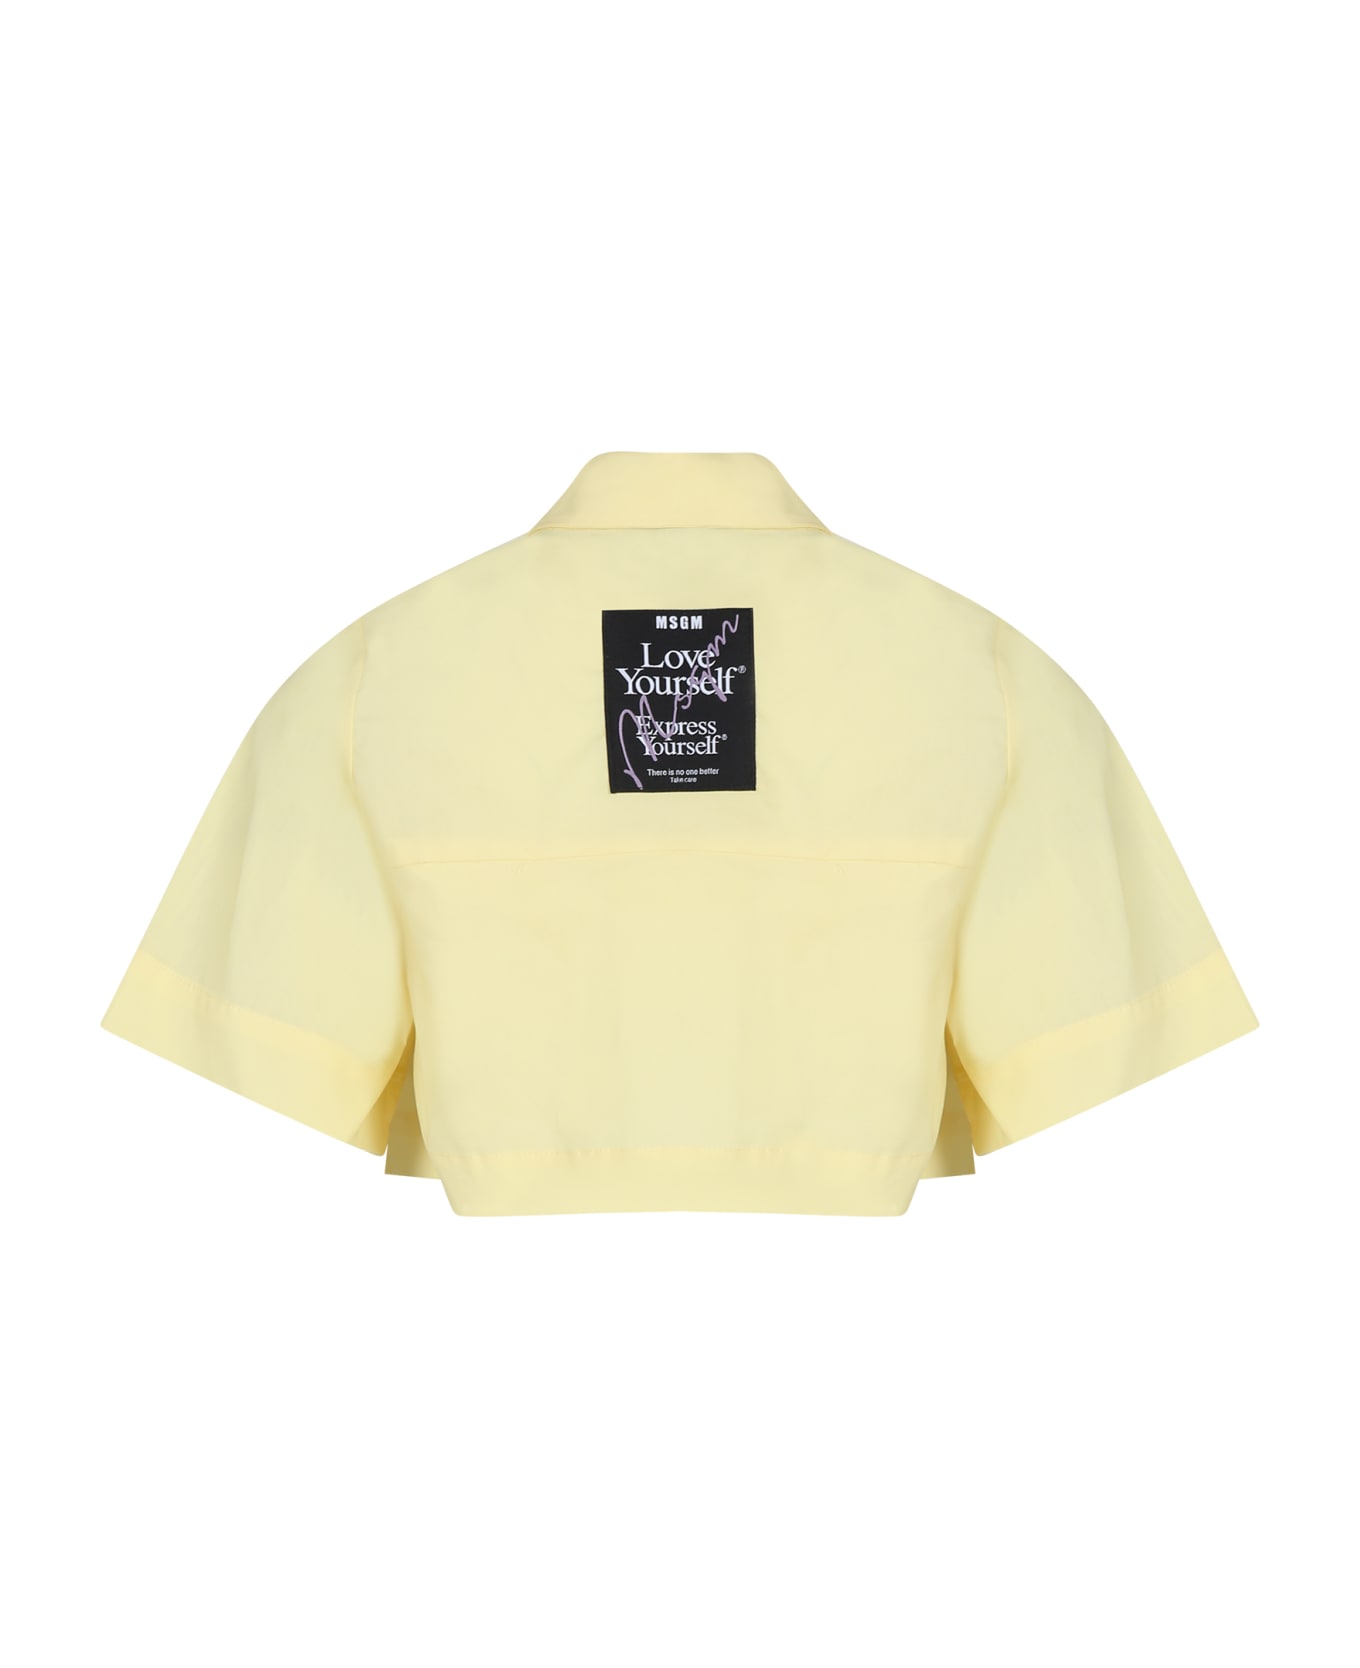 MSGM Yellow Crop Shirt For Girl With Logo - Yellow シャツ